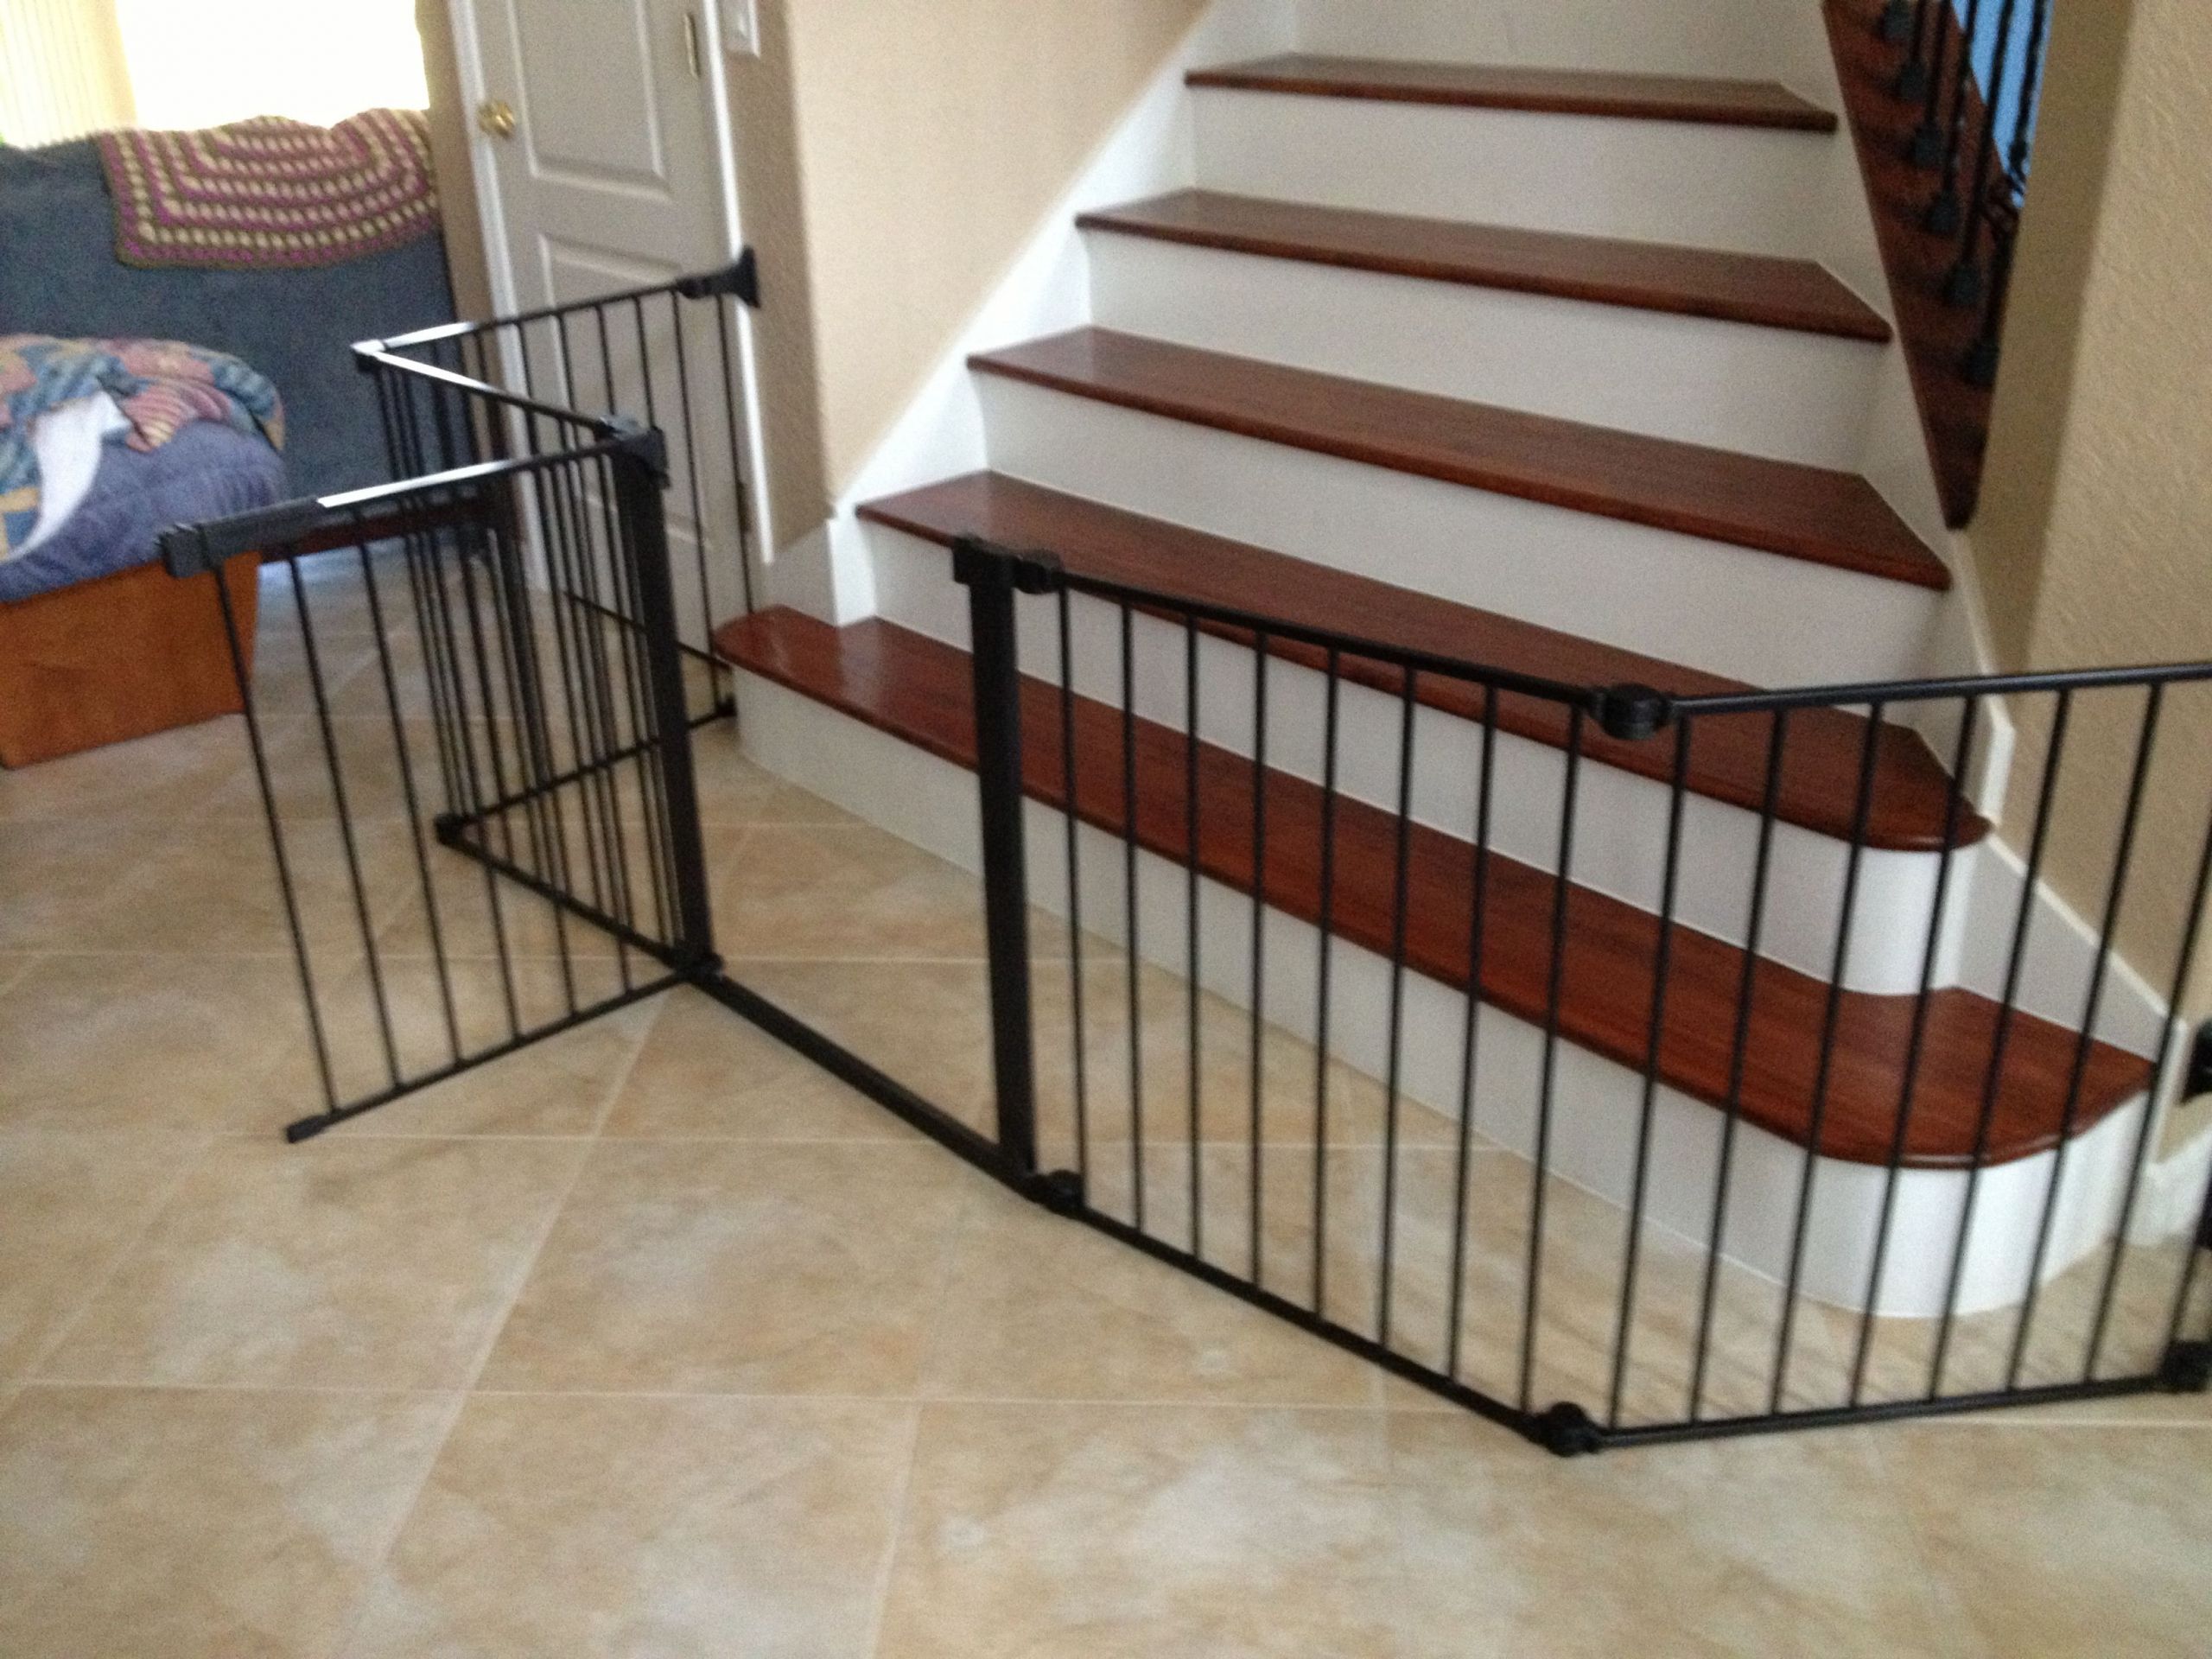 DIY Baby Gates For Large Openings
 1000 Ideas About Ba Gates Stairs Pinterest Ba Gates